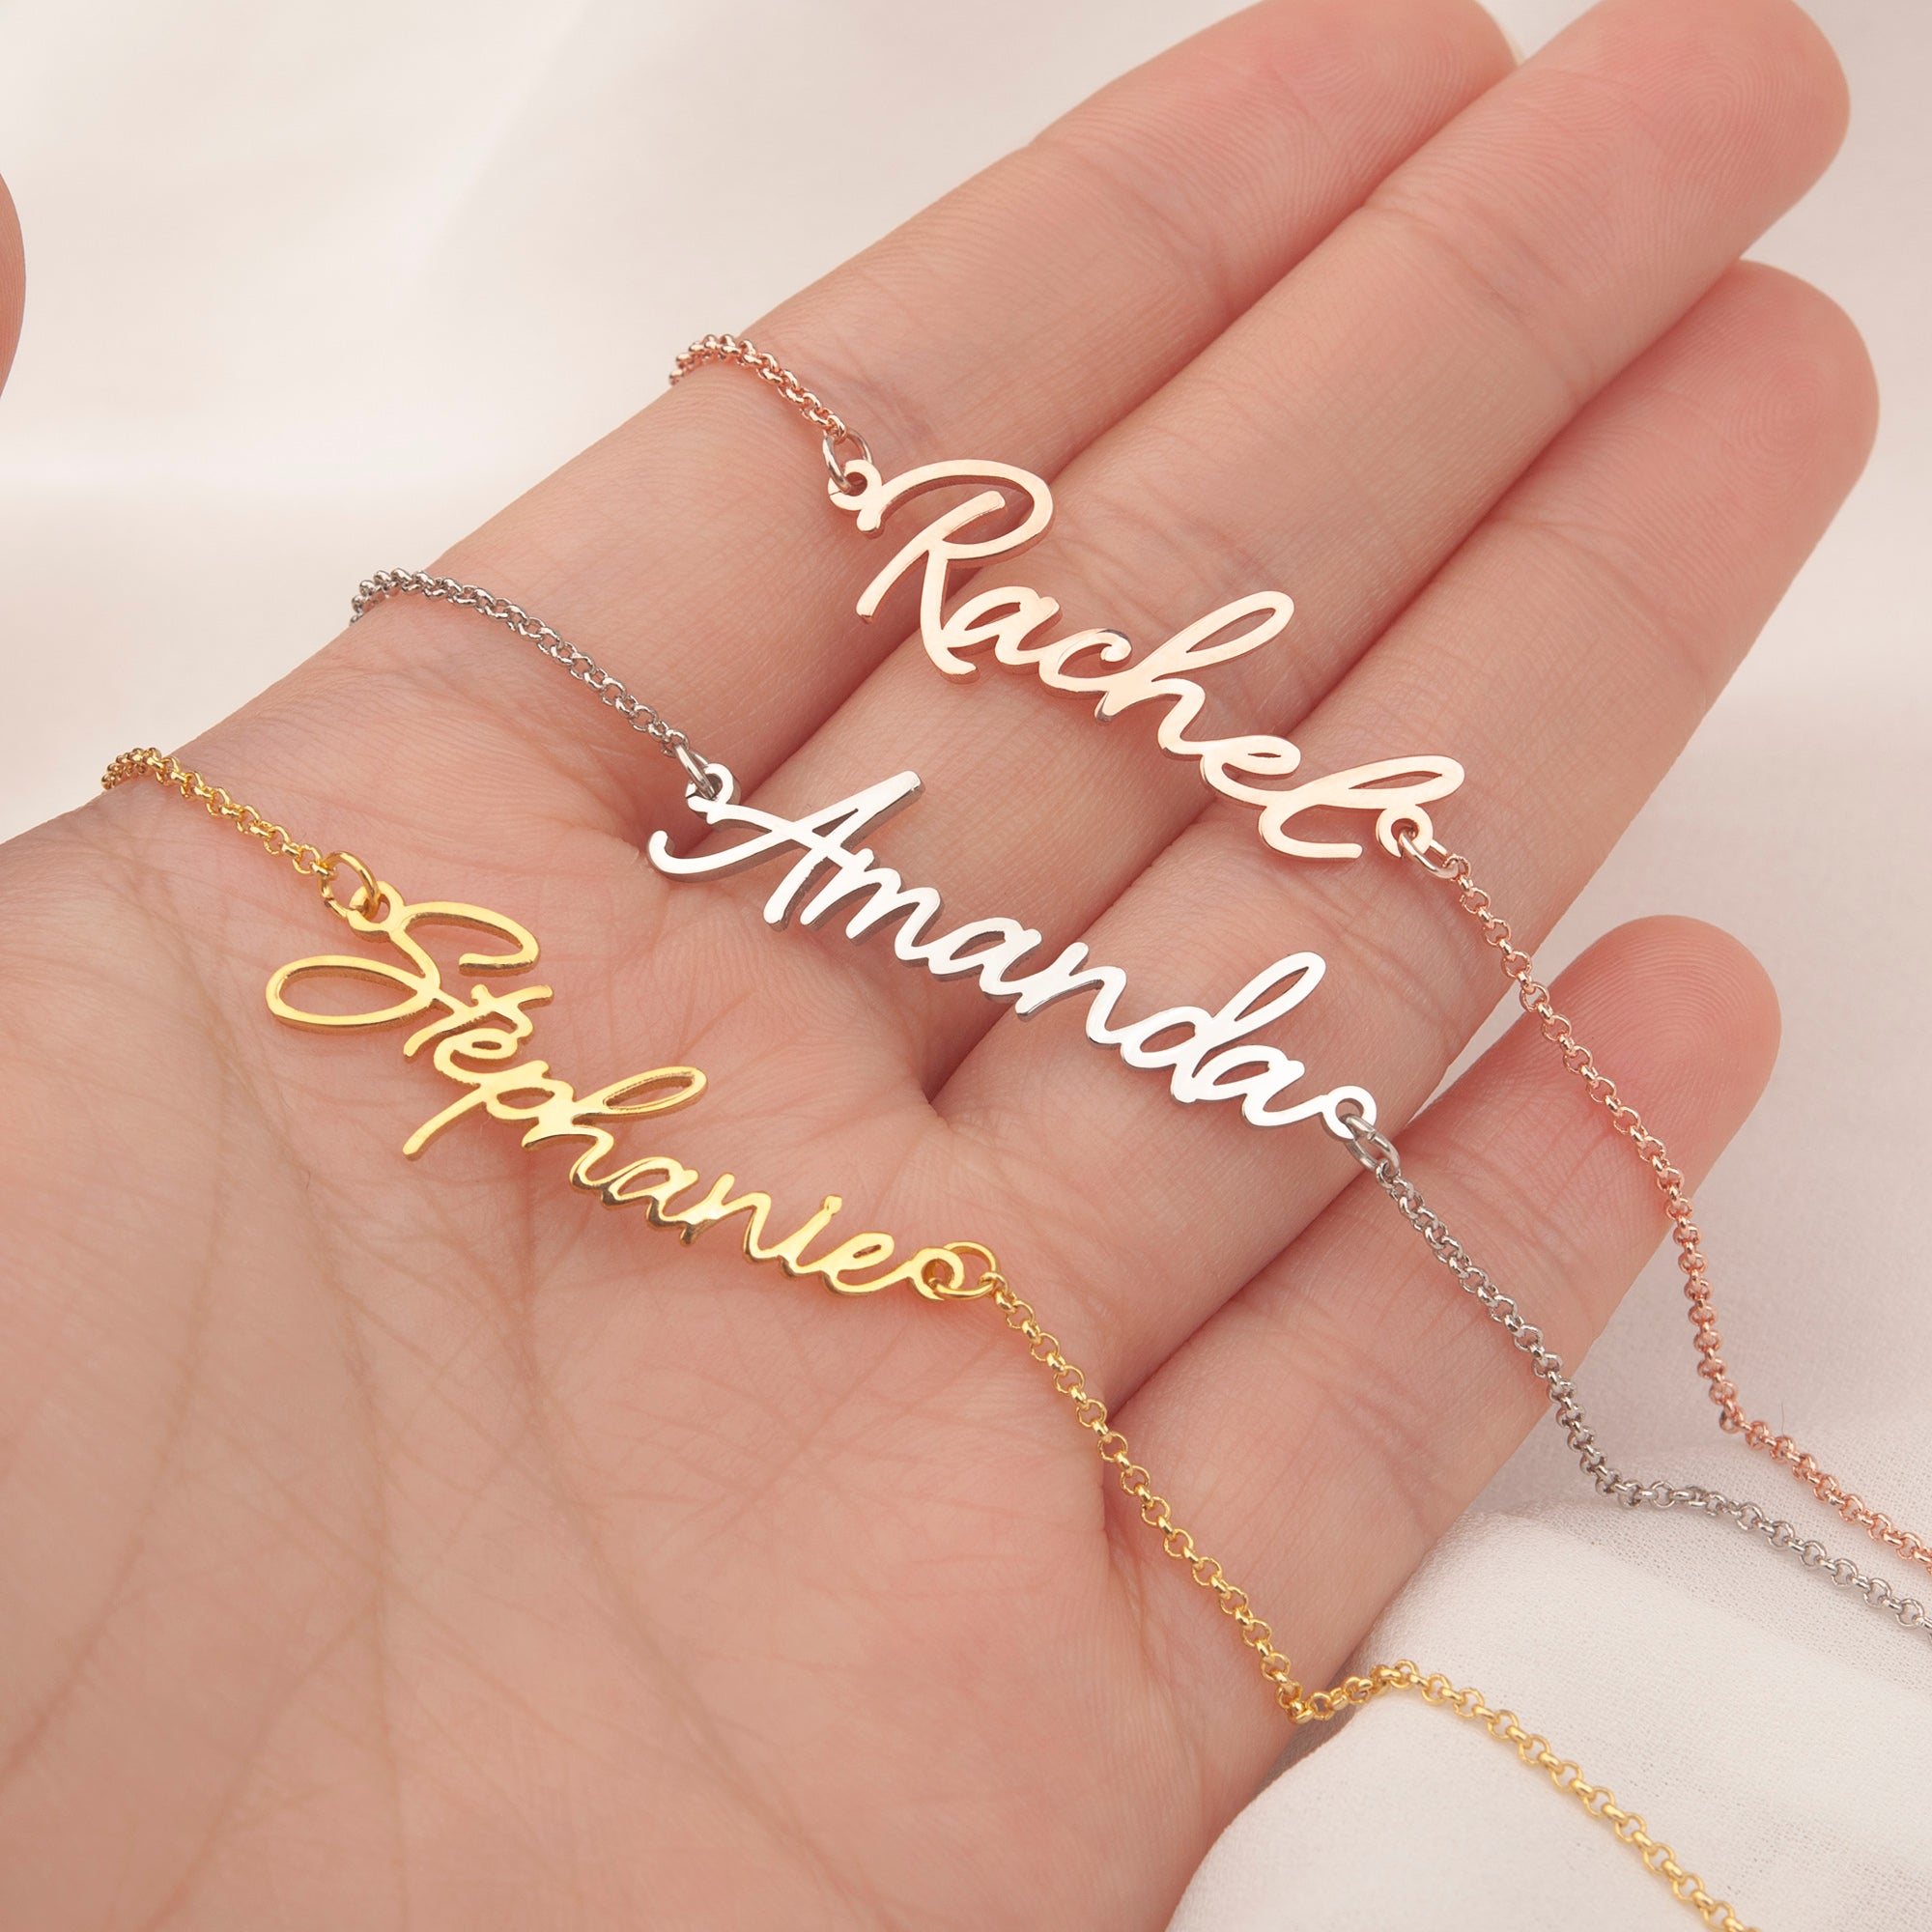 Amazon.com: Personalized Name Bracelet for Women Men Teen Girls Best Friend  Birthday Graduation Gifts Adjustable Woven Bracelets Sister Daughter  Mother's Day Mom Female Friendship Jewelry Unisex : Handmade Products